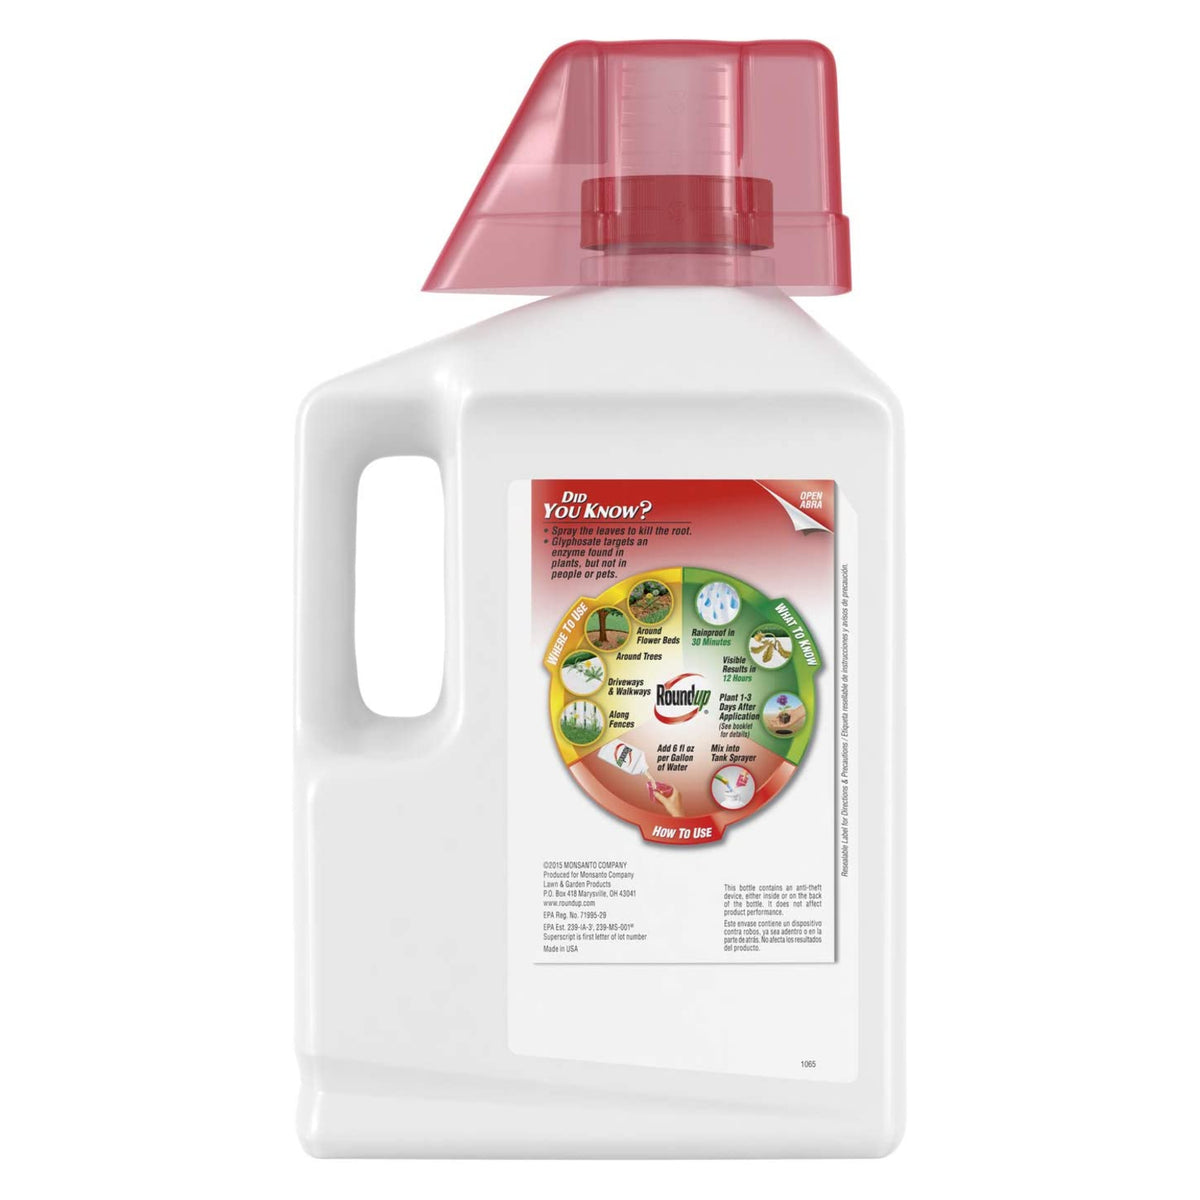 Roundup 5006010 Concentrate Plus Weed & Grass Killer, 1/2 Gallon